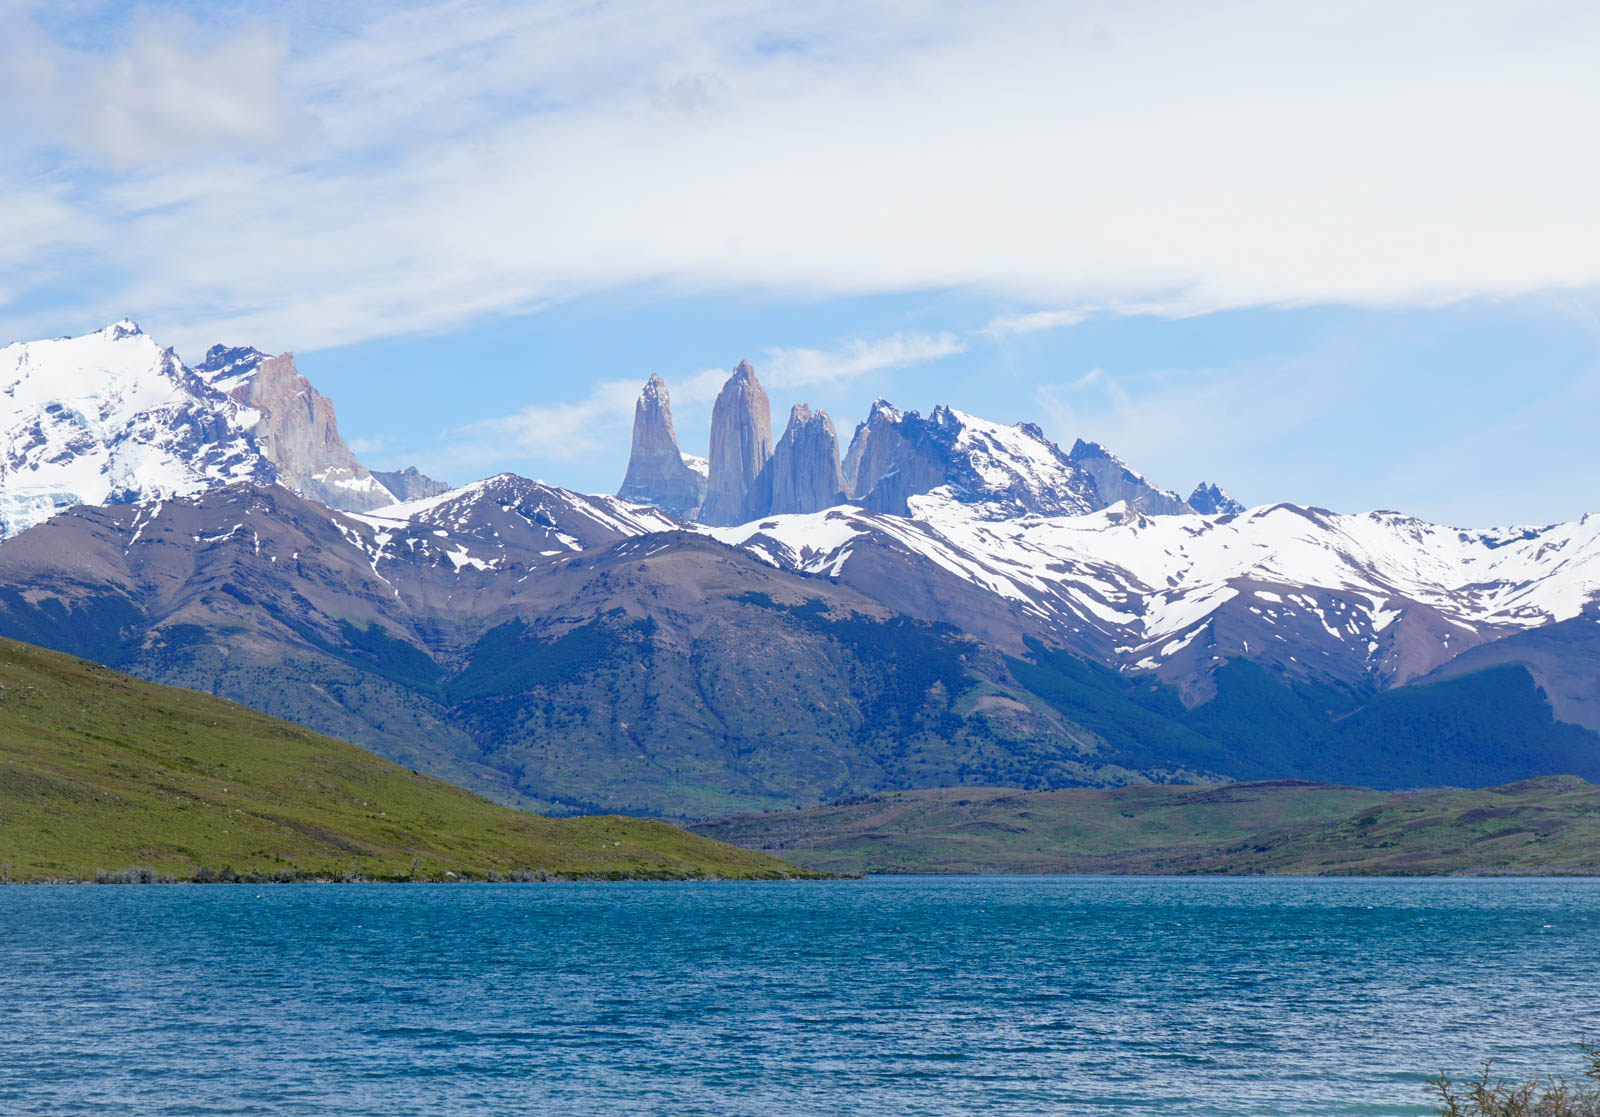 The Famous Torres del Paine (Towers of Paine)